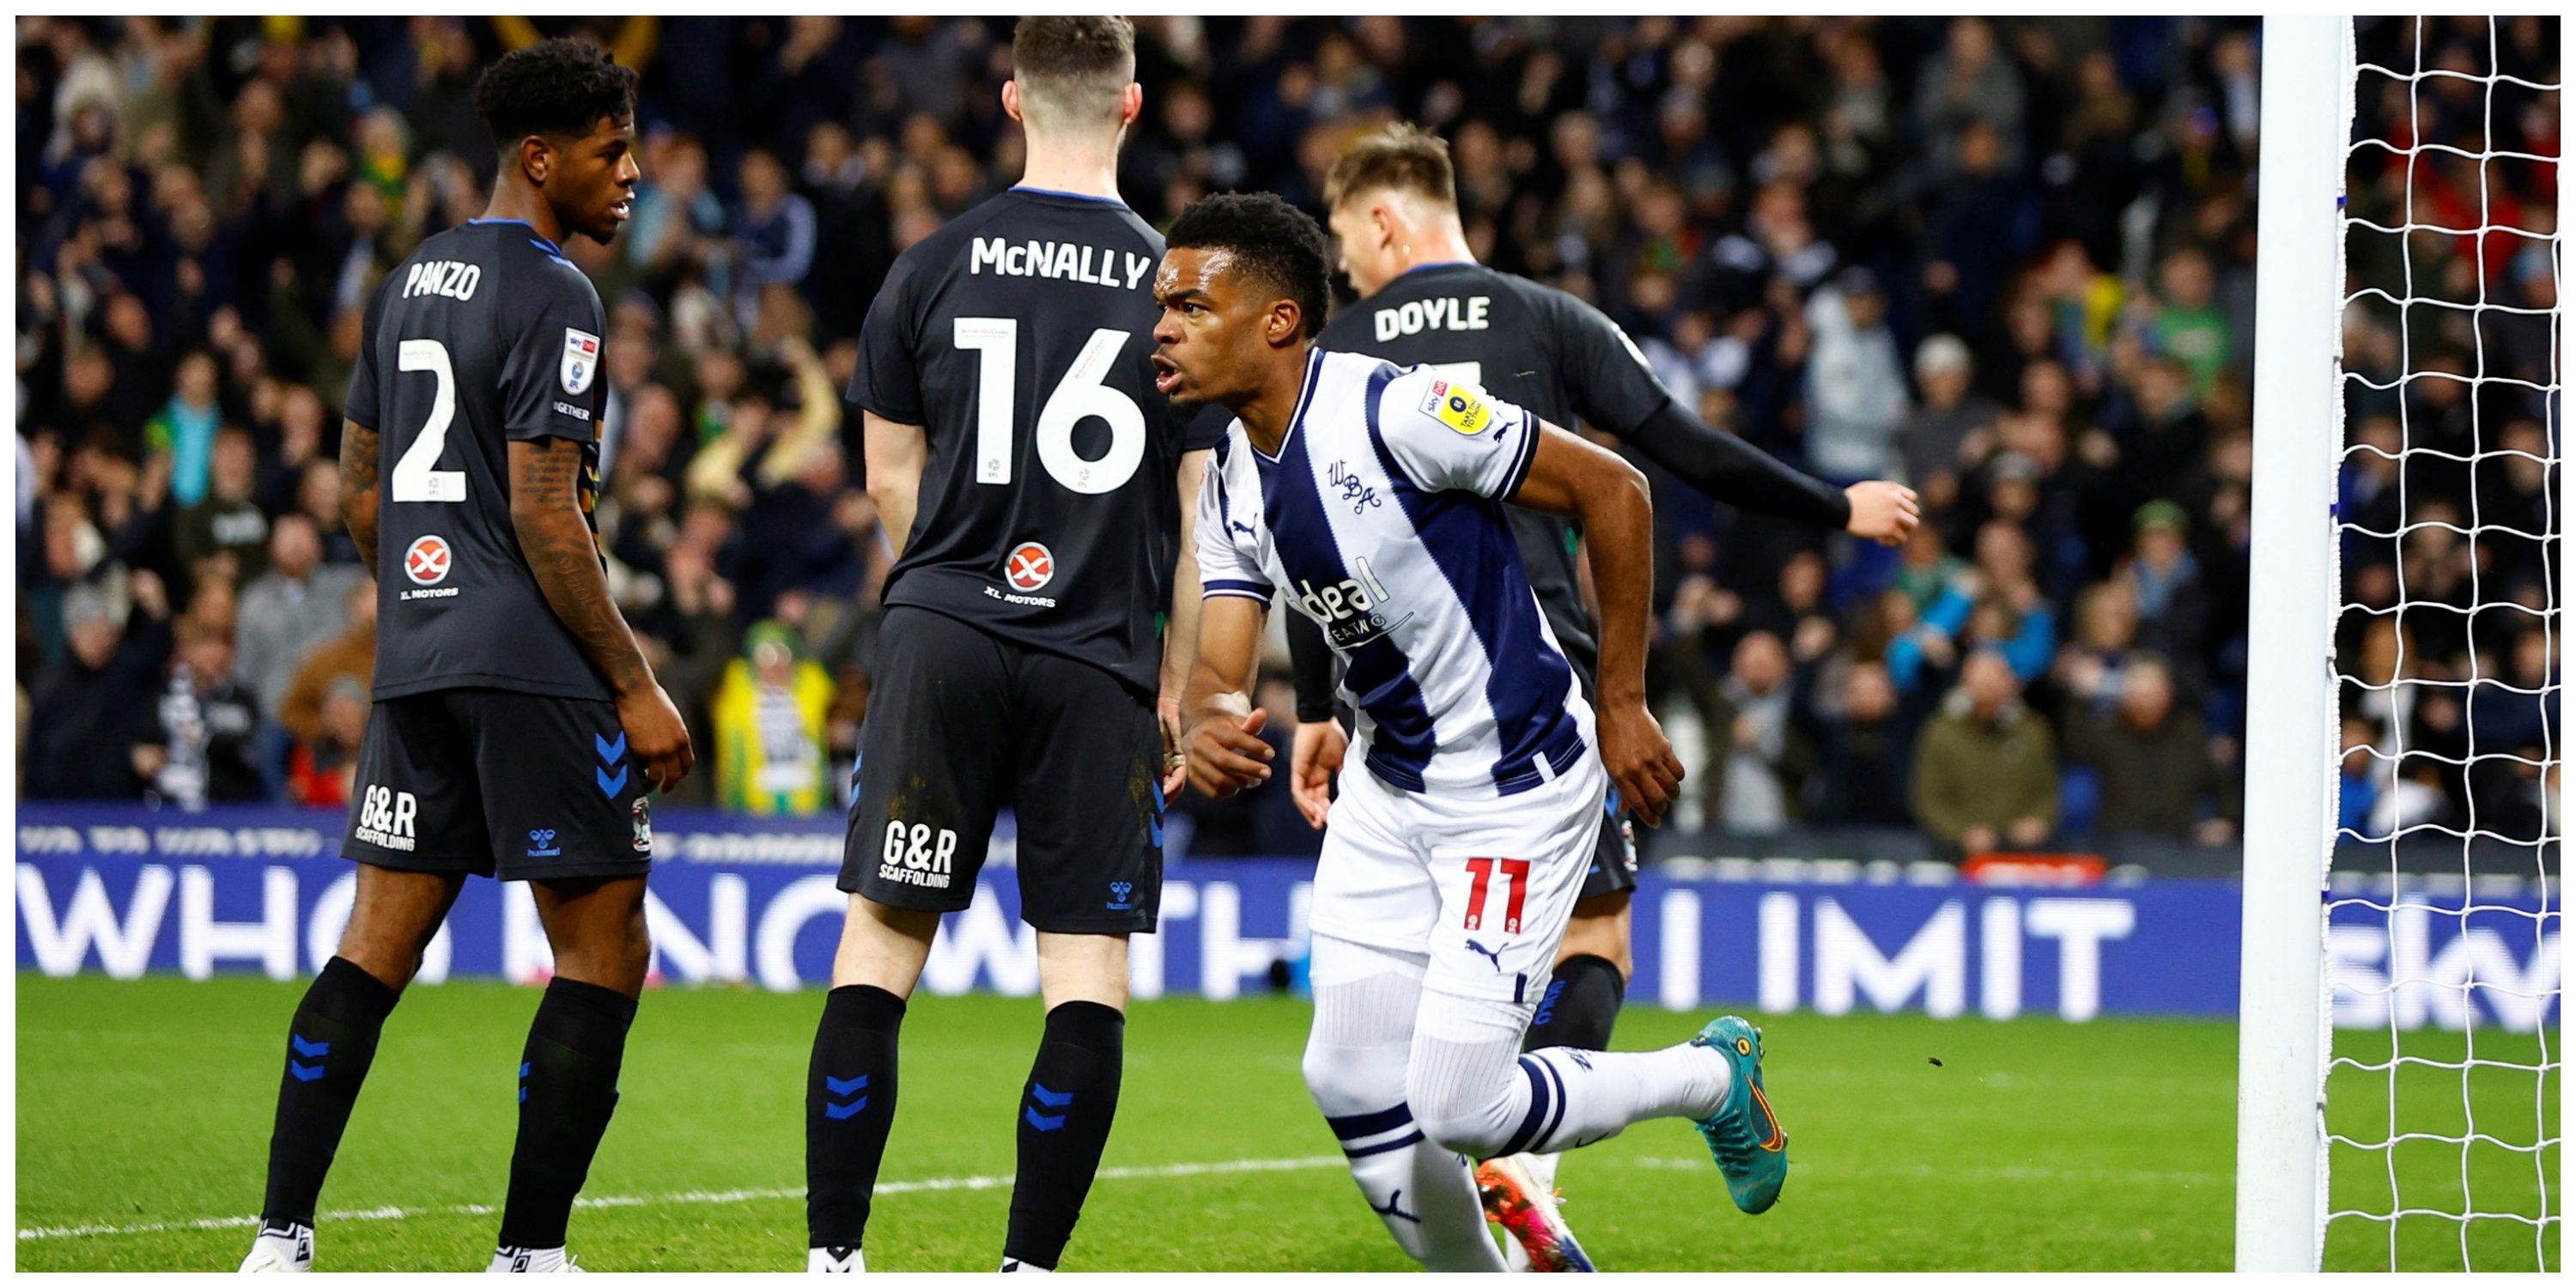 West Bromwich Albion winger Grady Diangana